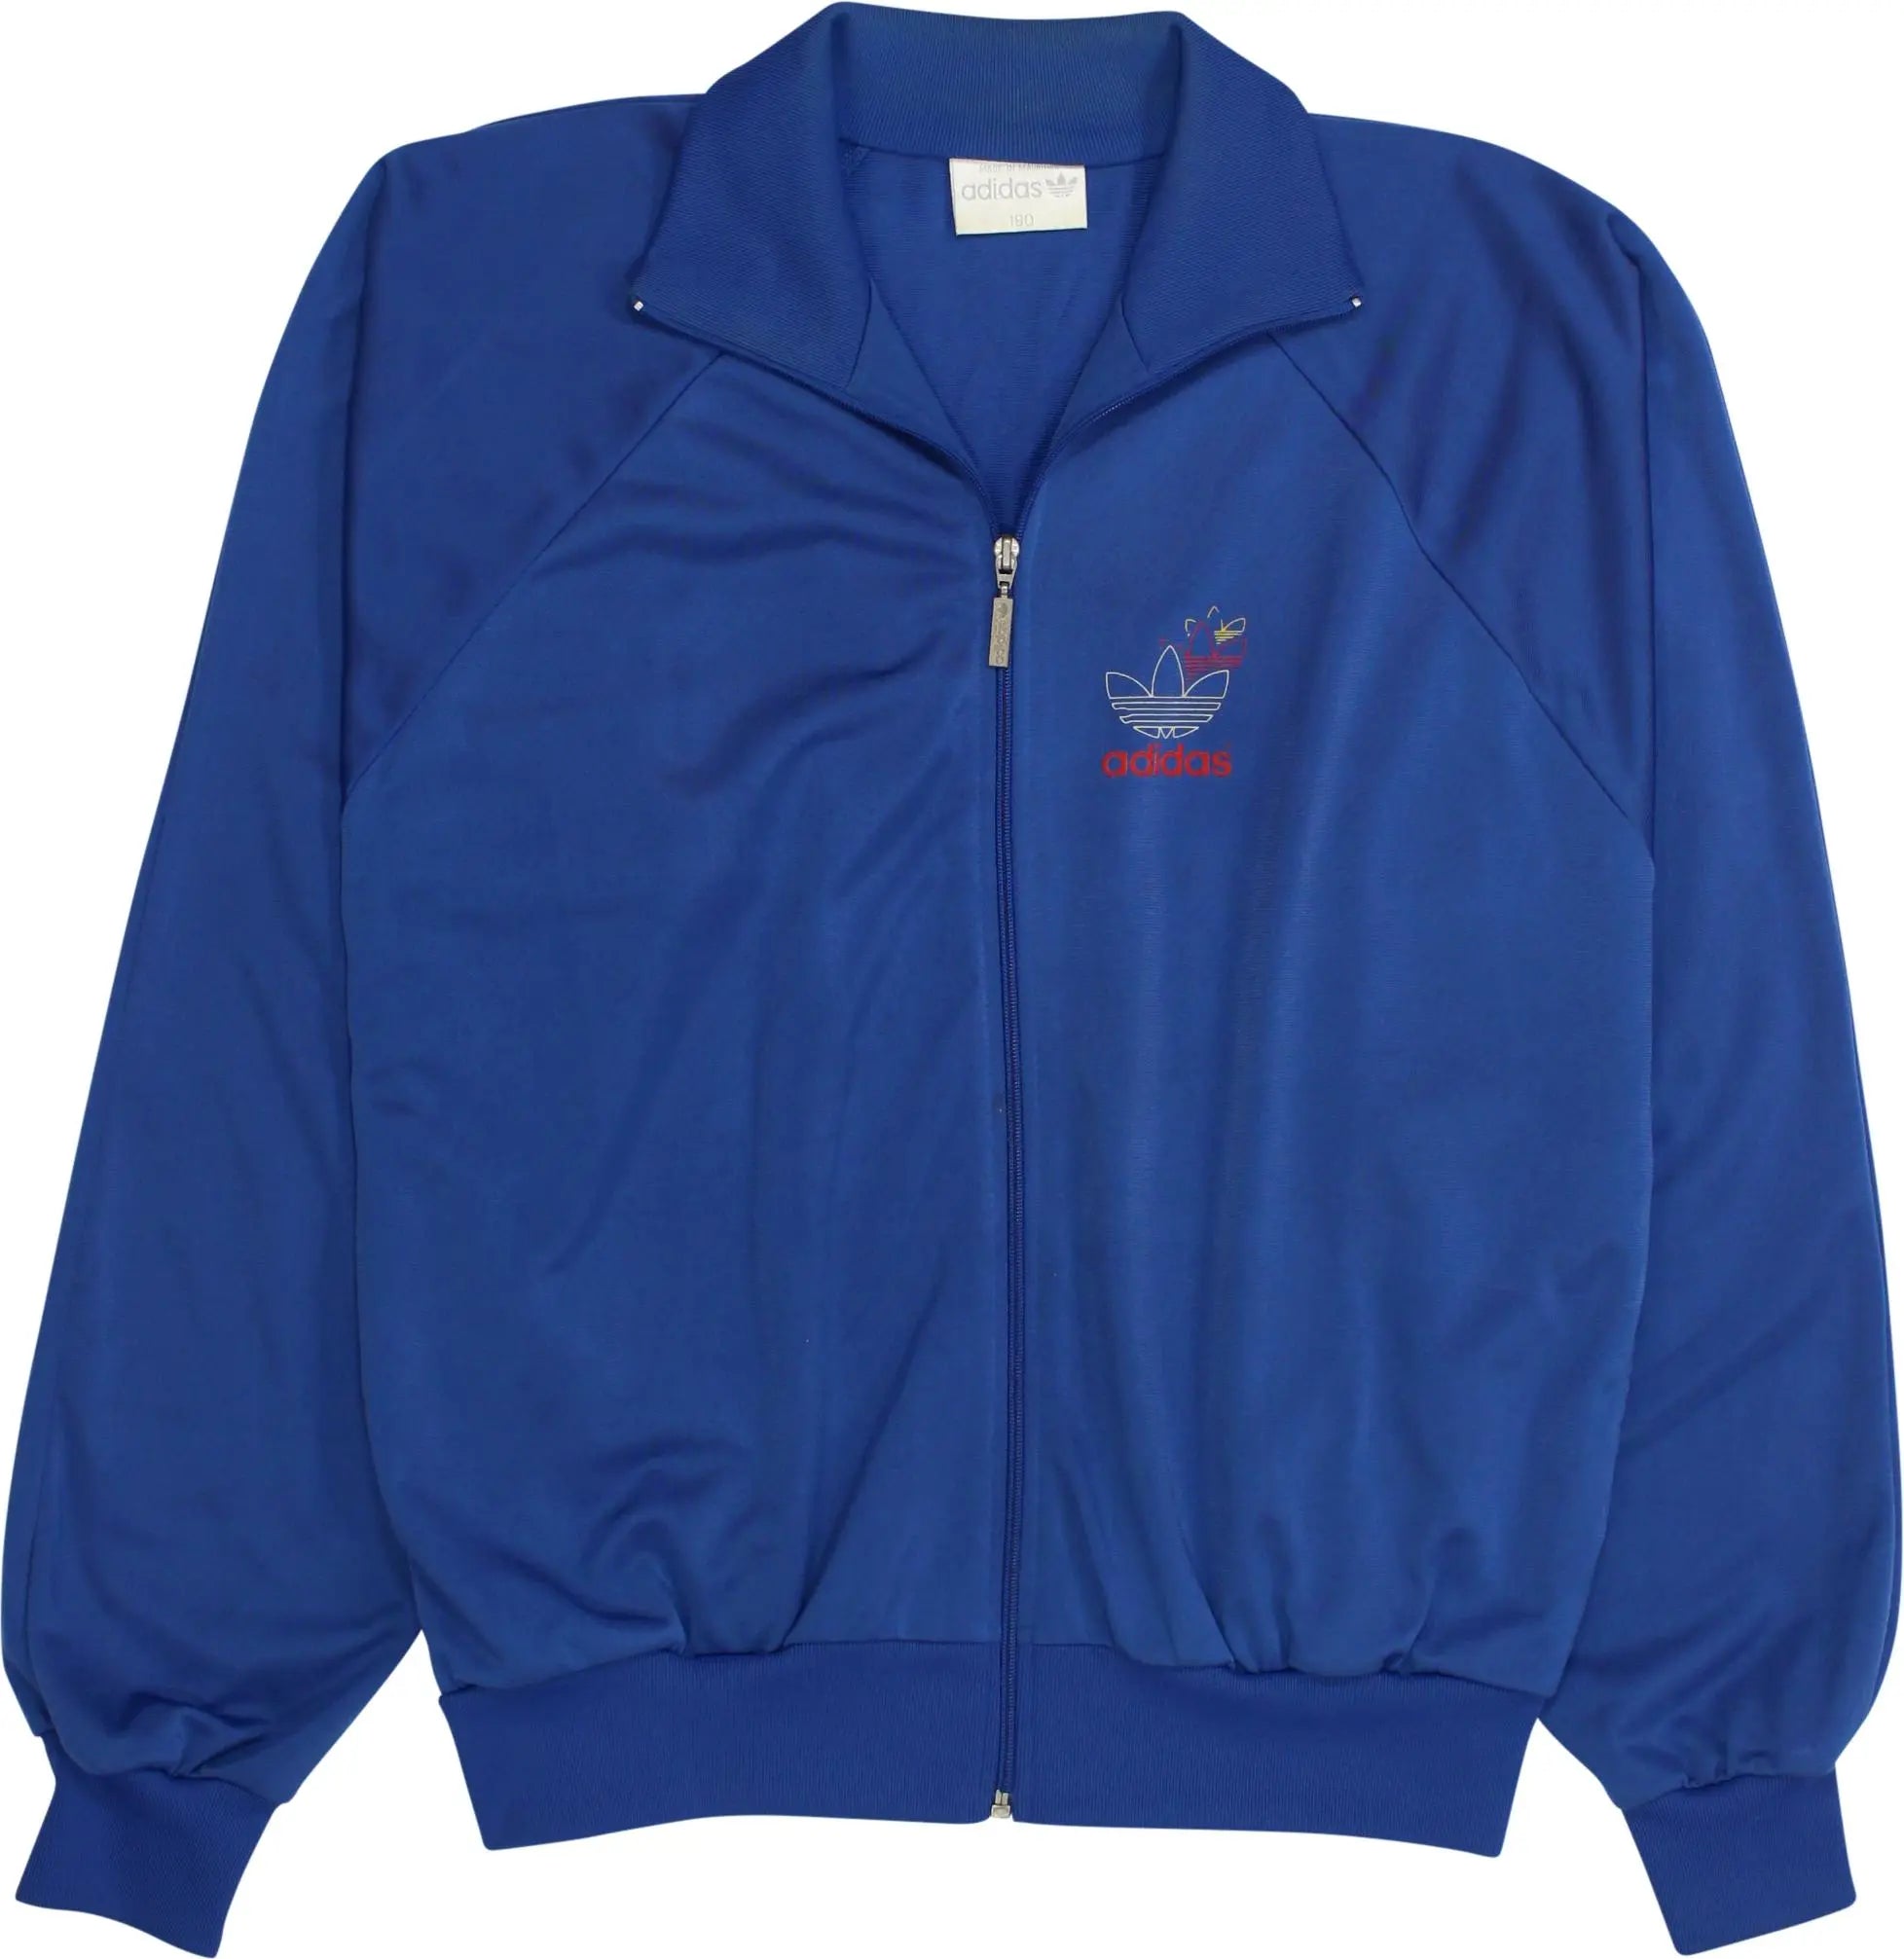 Adidas - 70s Blue Track jacket by Adidas- ThriftTale.com - Vintage and second handclothing